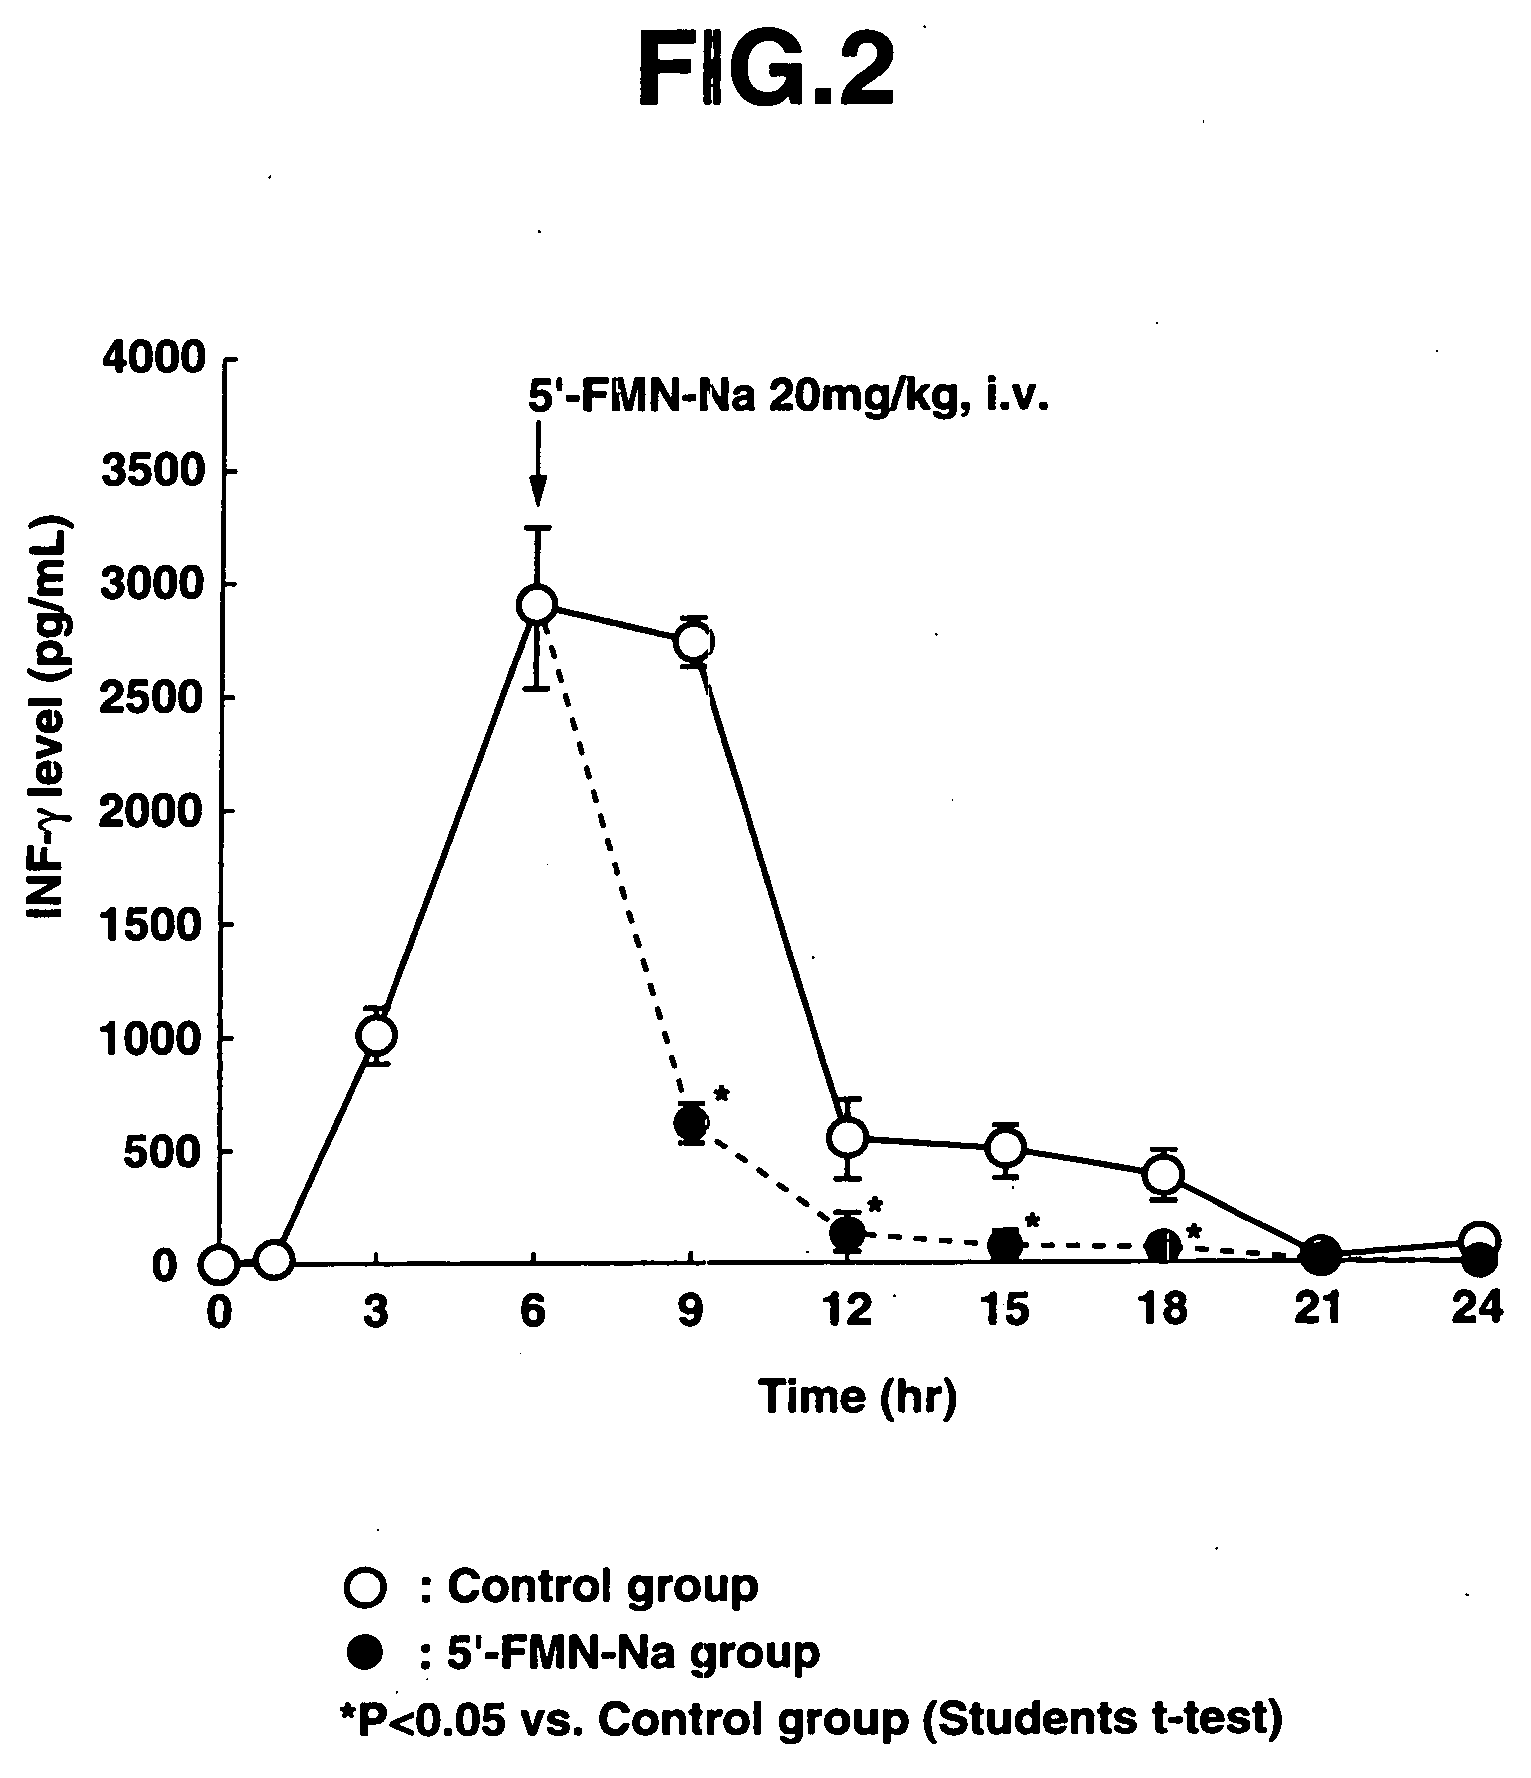 Drugs containing riboflavin-type compounds